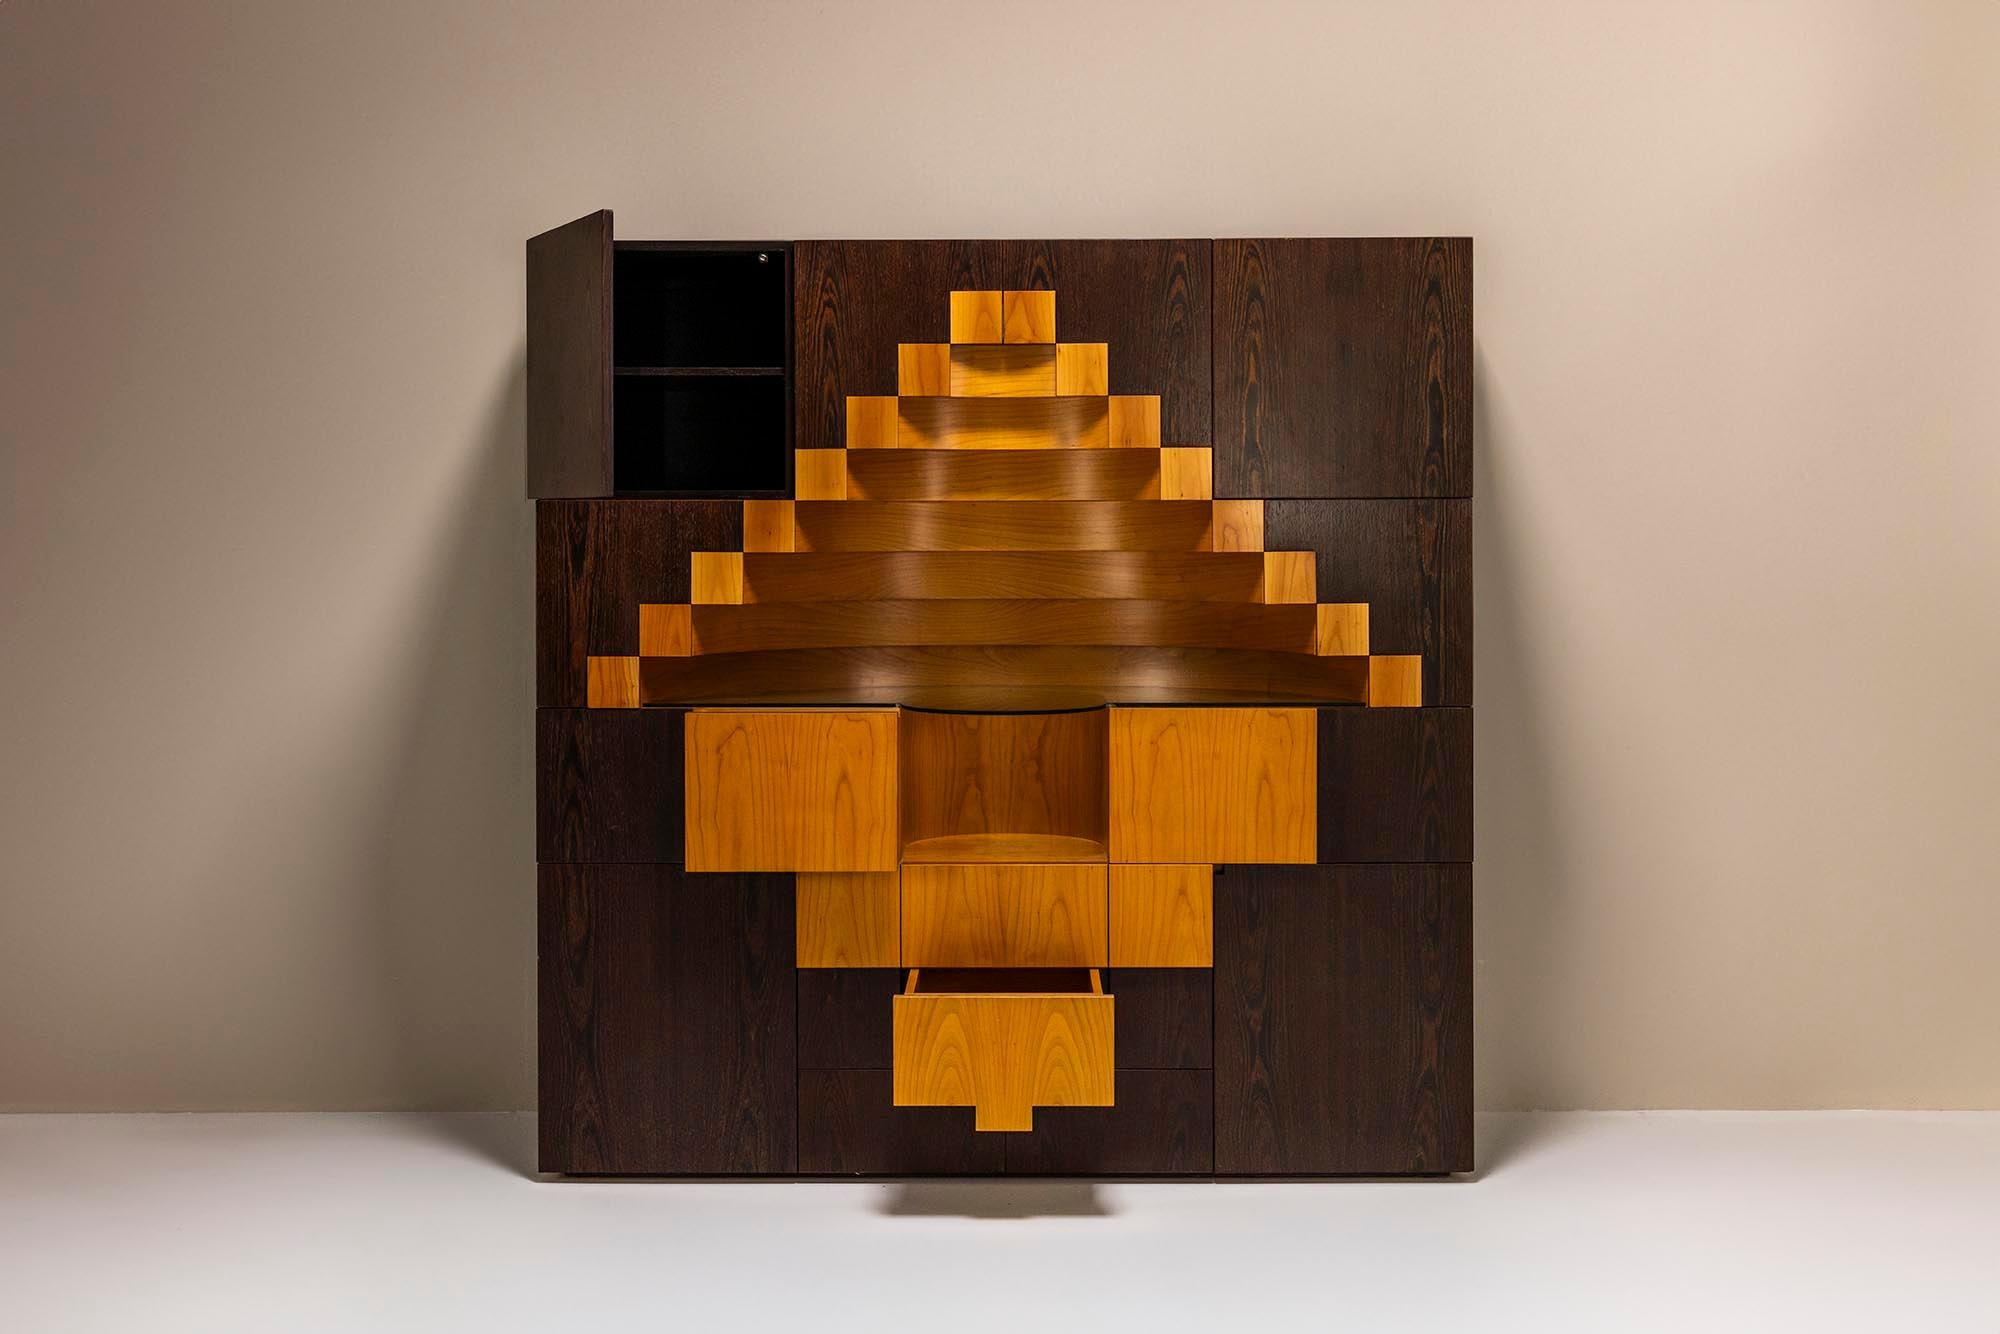 Italian Ferdinando Meccani “Corinto” Sideboard In Wengé And Stained Oak, Italy 1978 For Sale